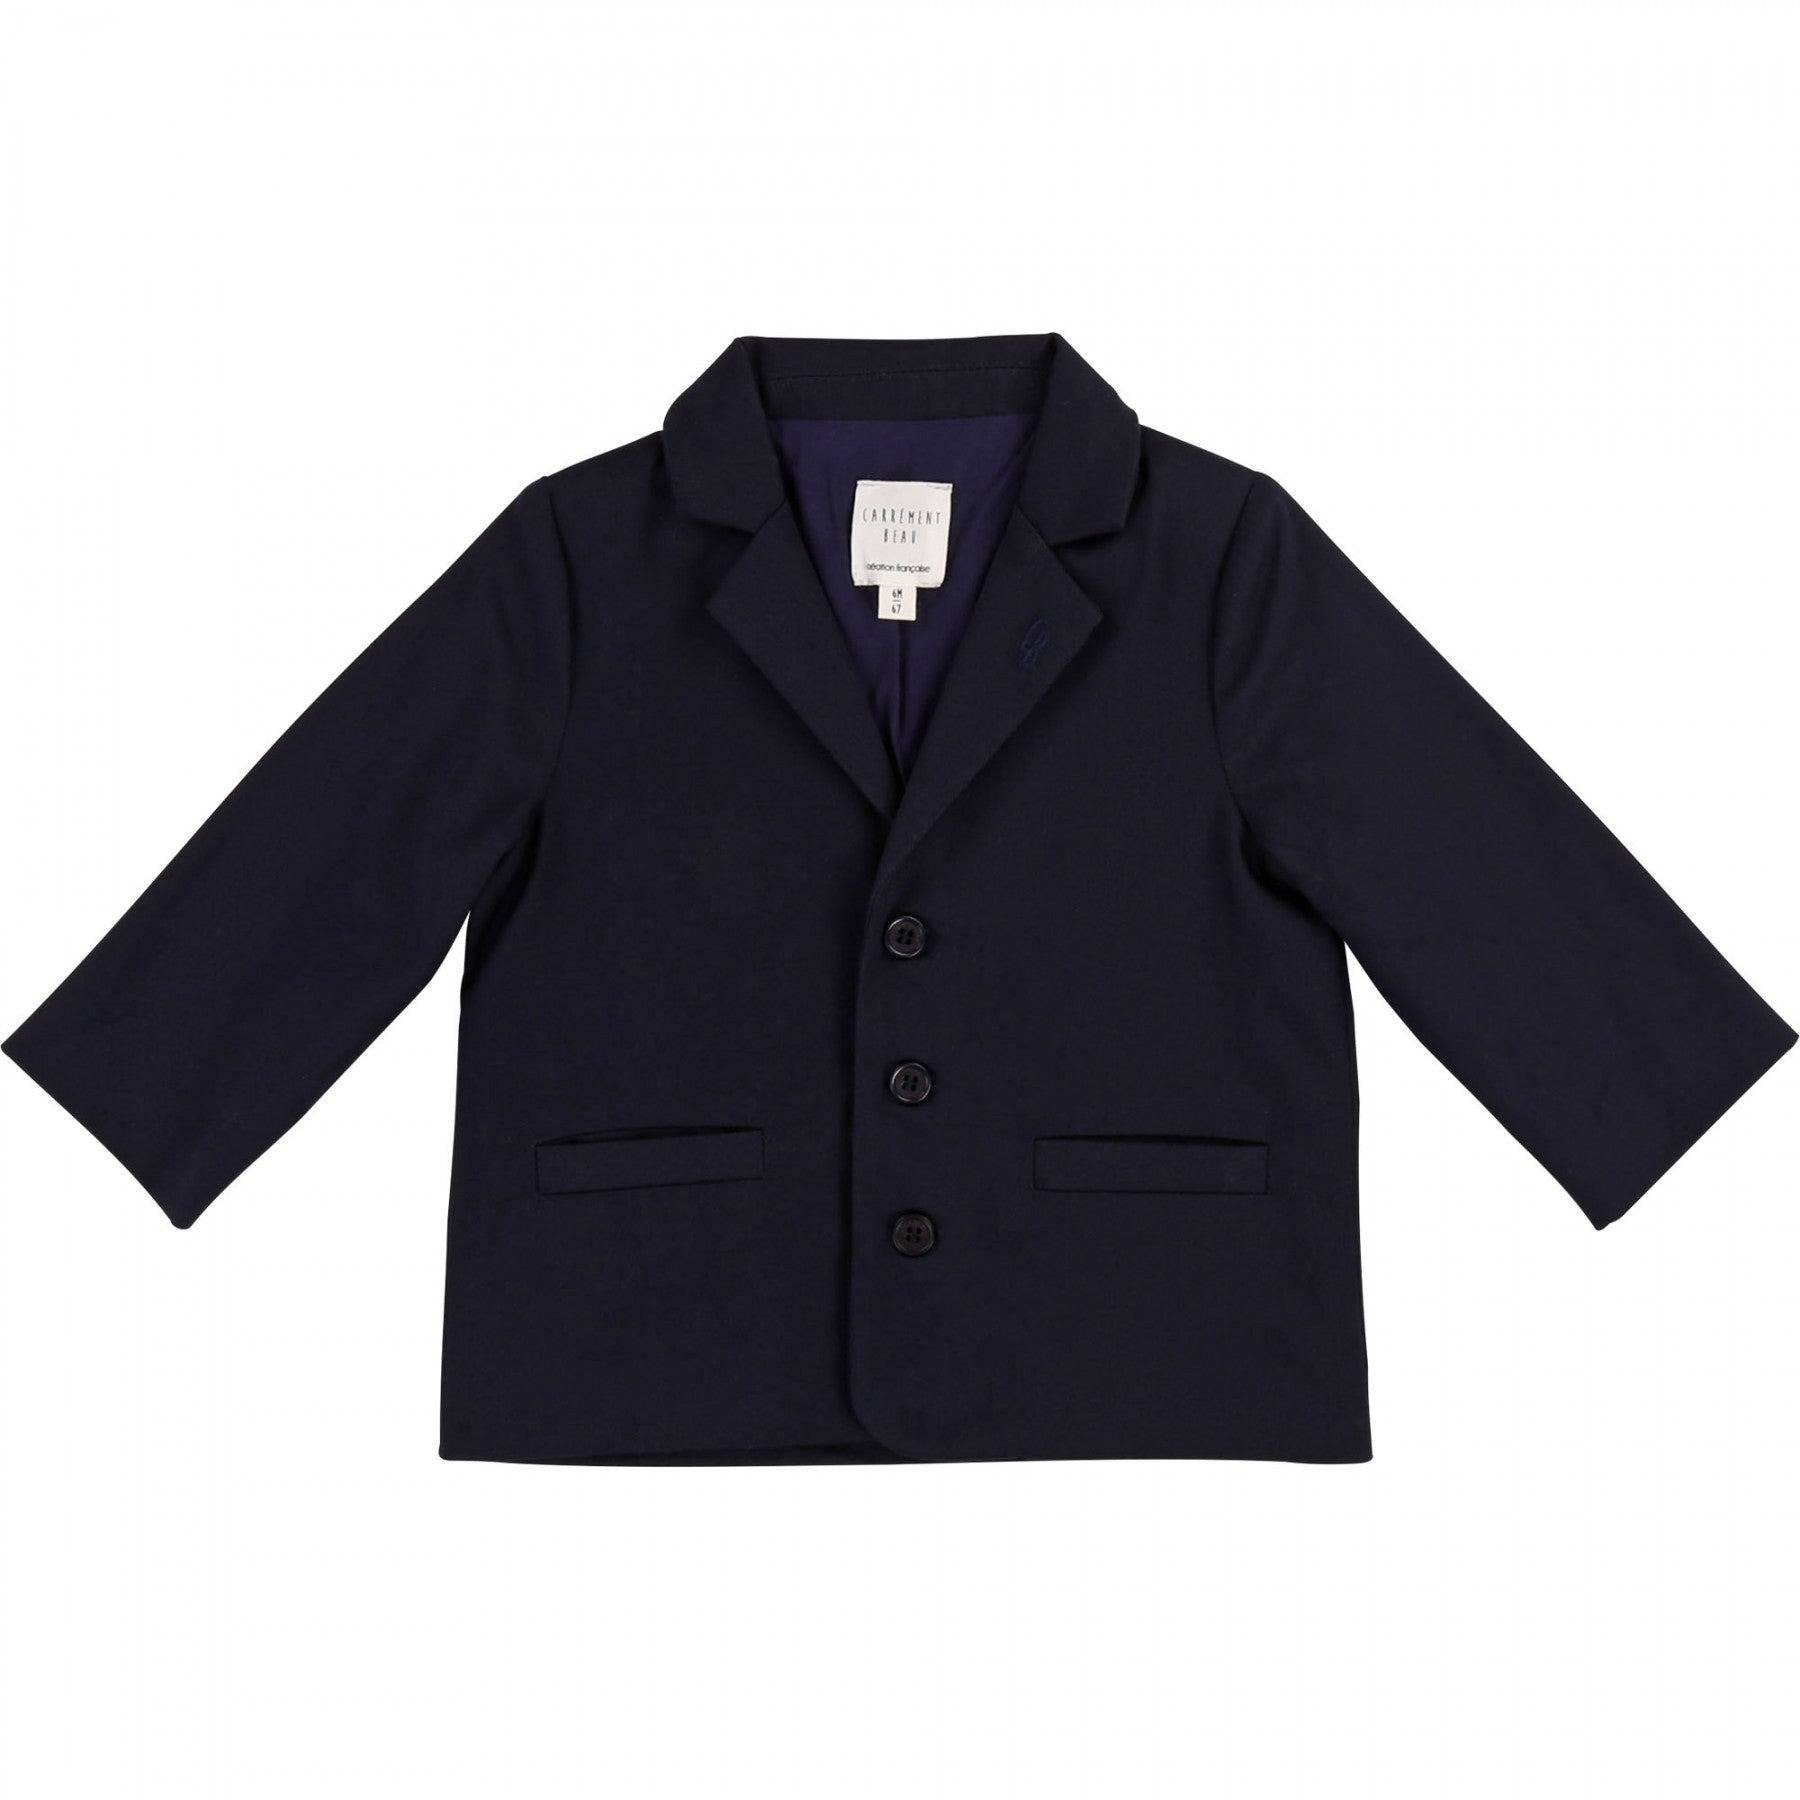 BABY BOYS NAVY TWO PIECE SUIT SET